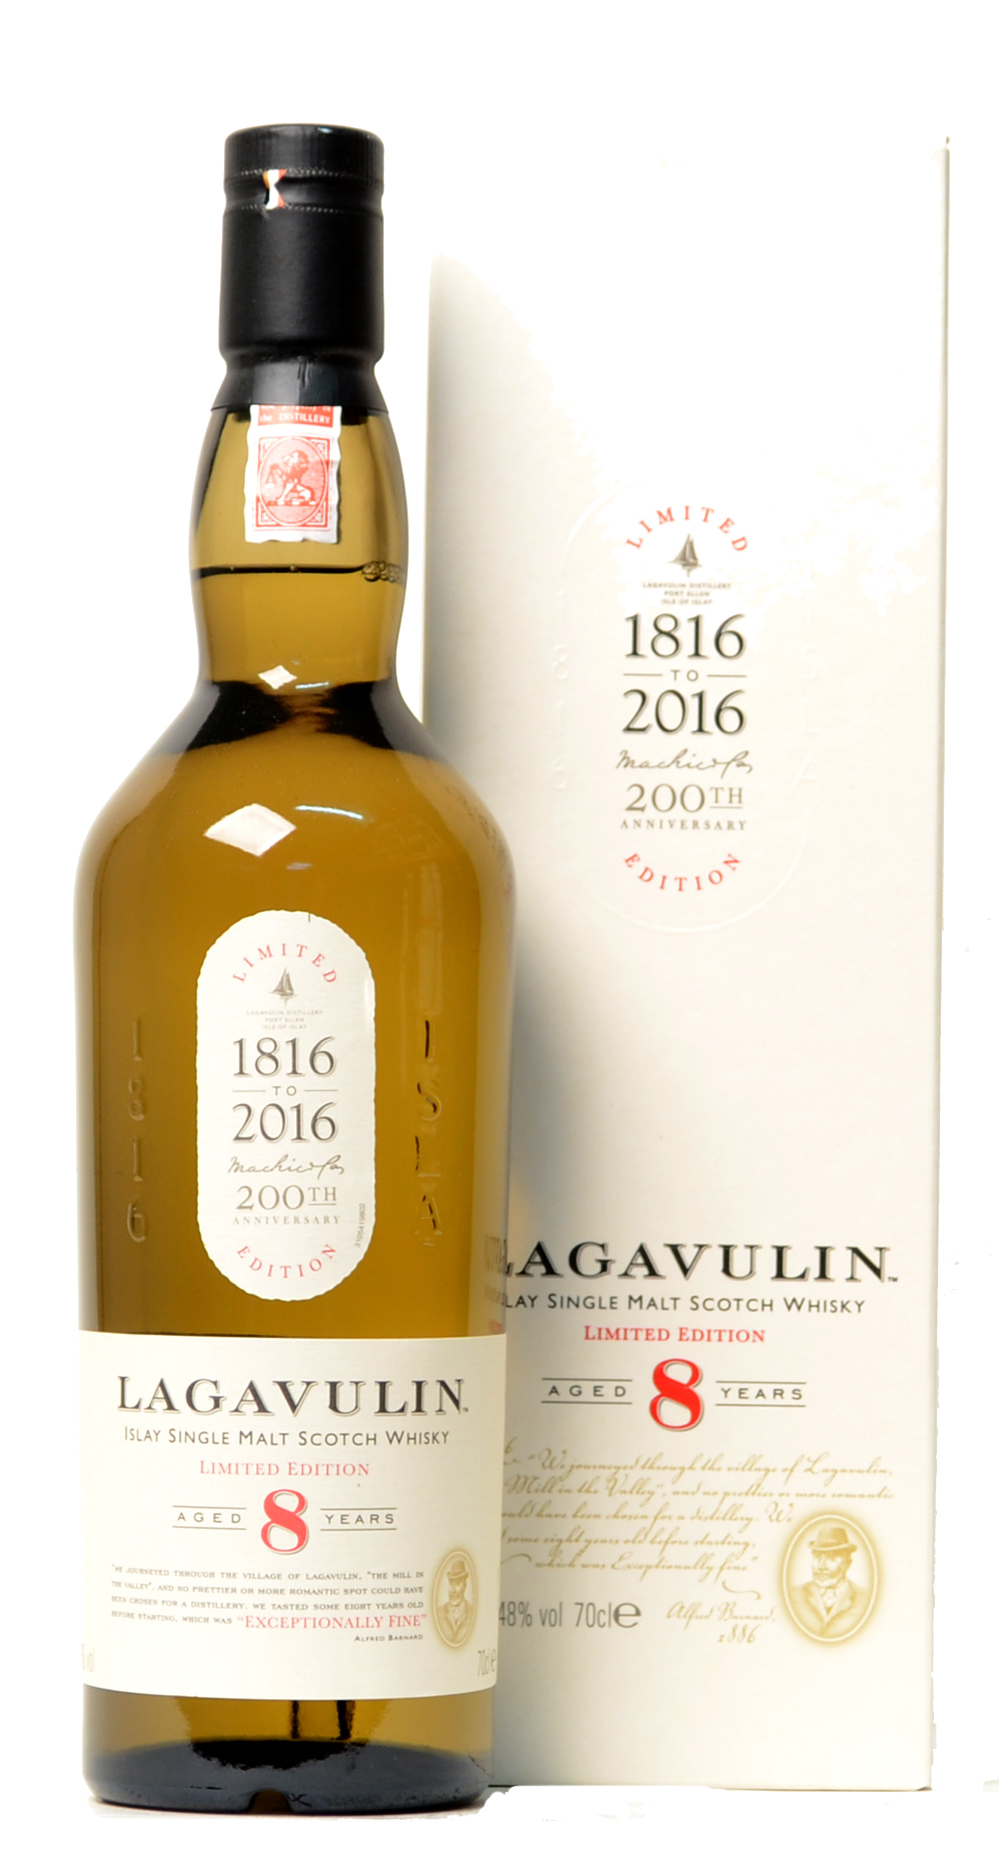 Limited Edition - 200th Anniversary